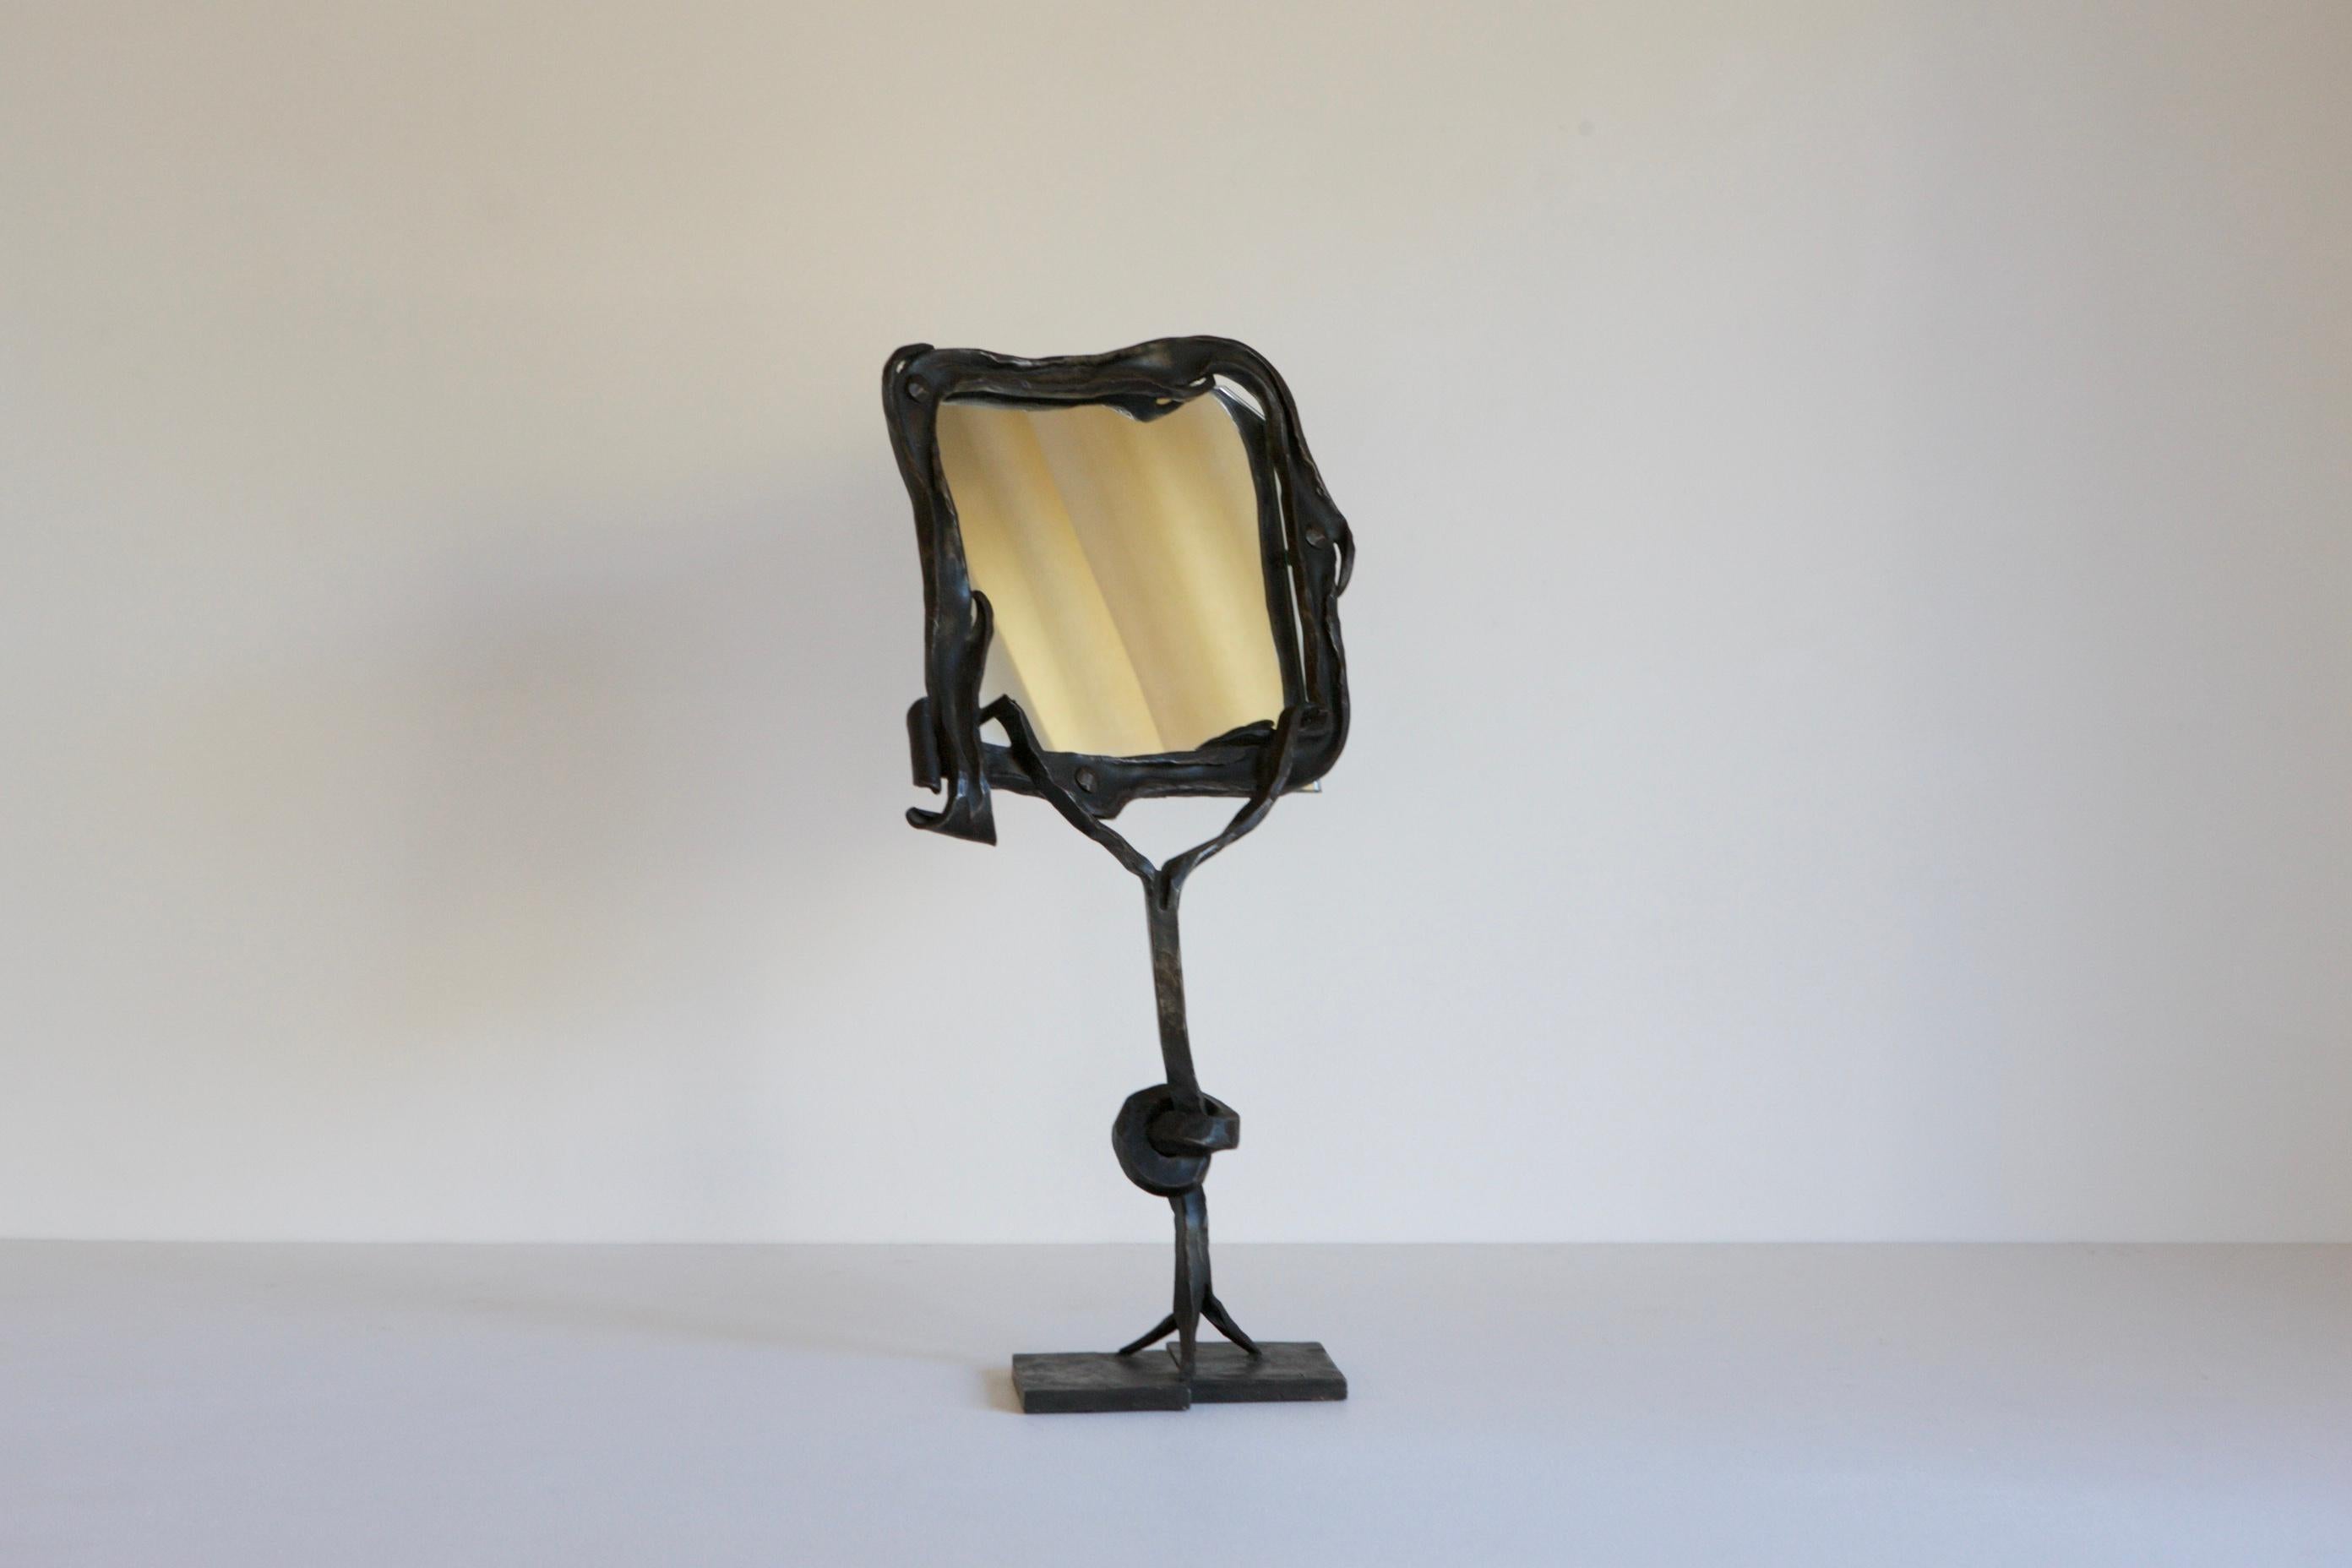 An exceptional table mirror with a surrealist feel. The piece is handmade with wrought iron and stands alone.